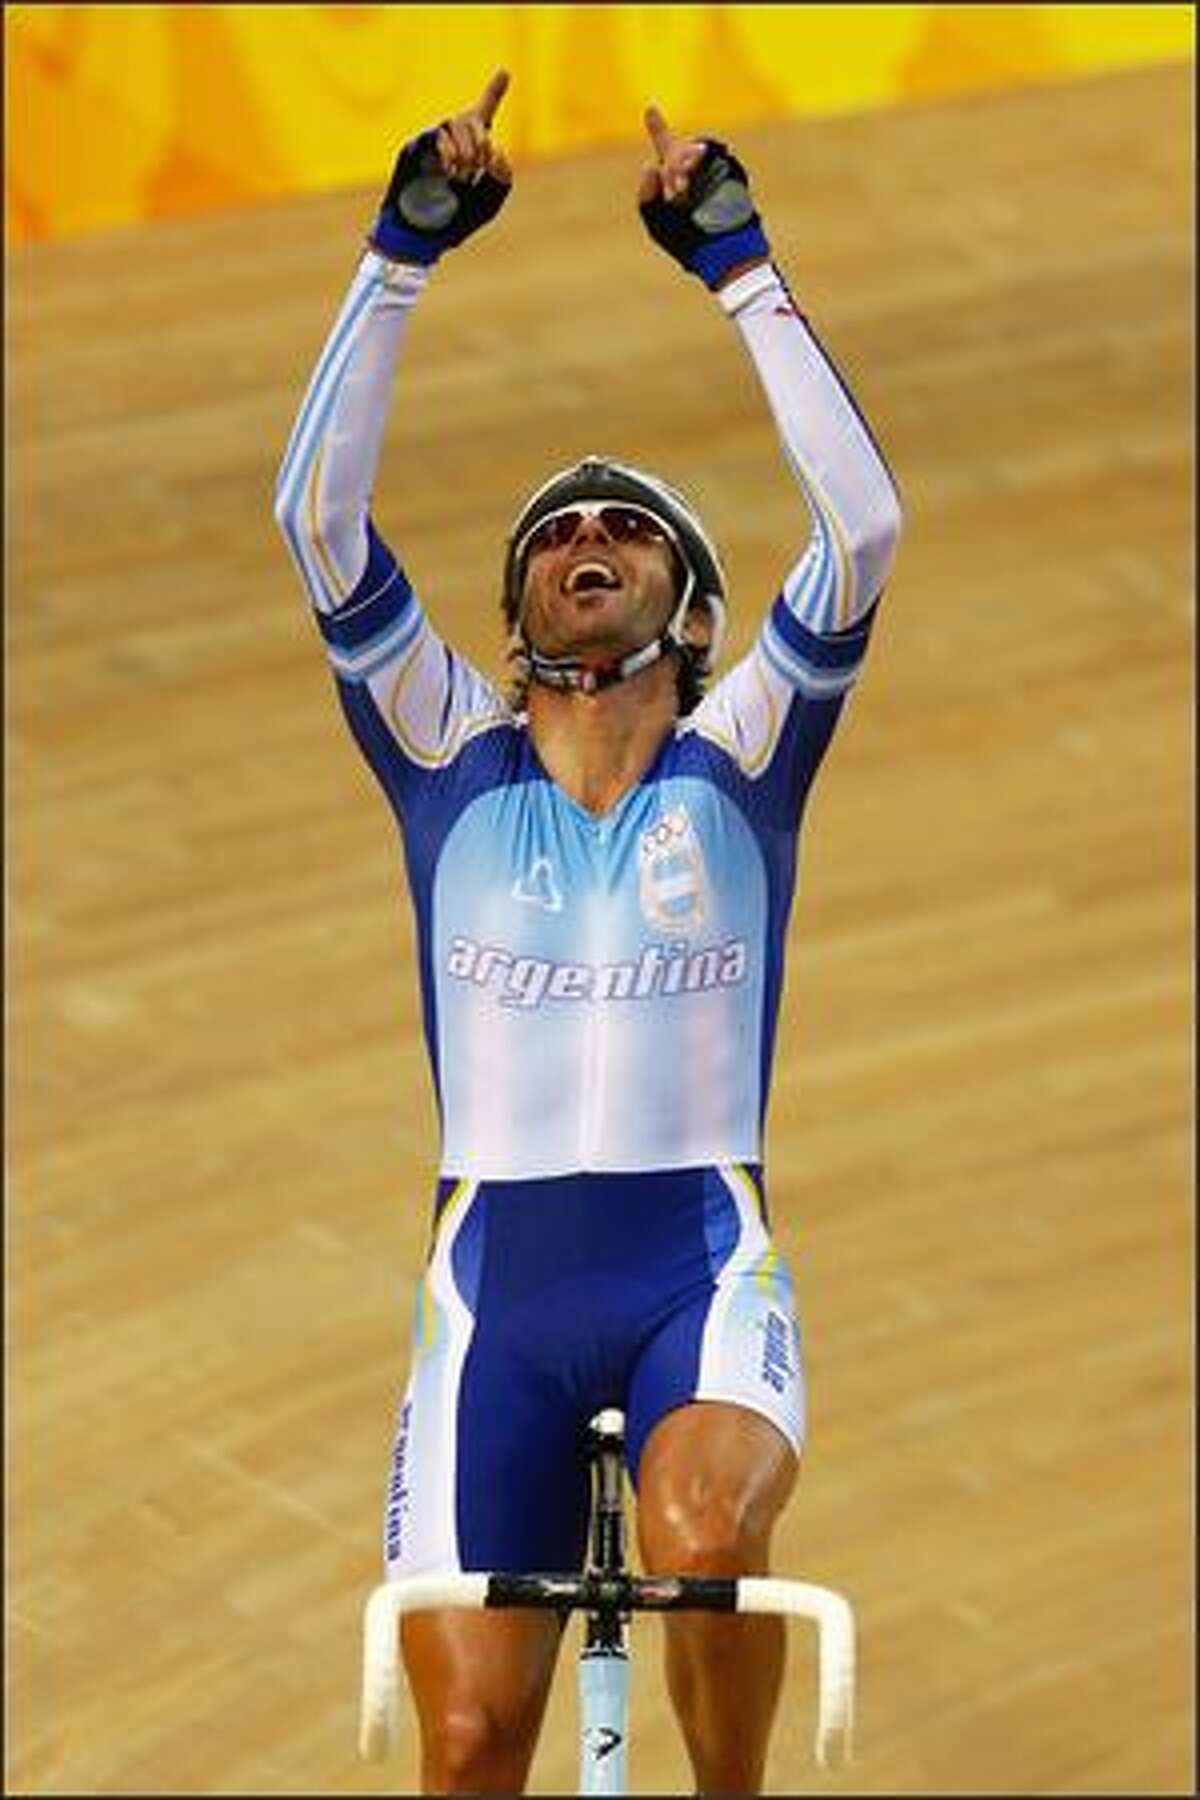 Walter Fernando Perez of Argentina celebrates the gold medal in the Men's Madison at the Laoshan Velodrome on Day 11 of the Beijing 2008 Olympic Games on Tuesday.